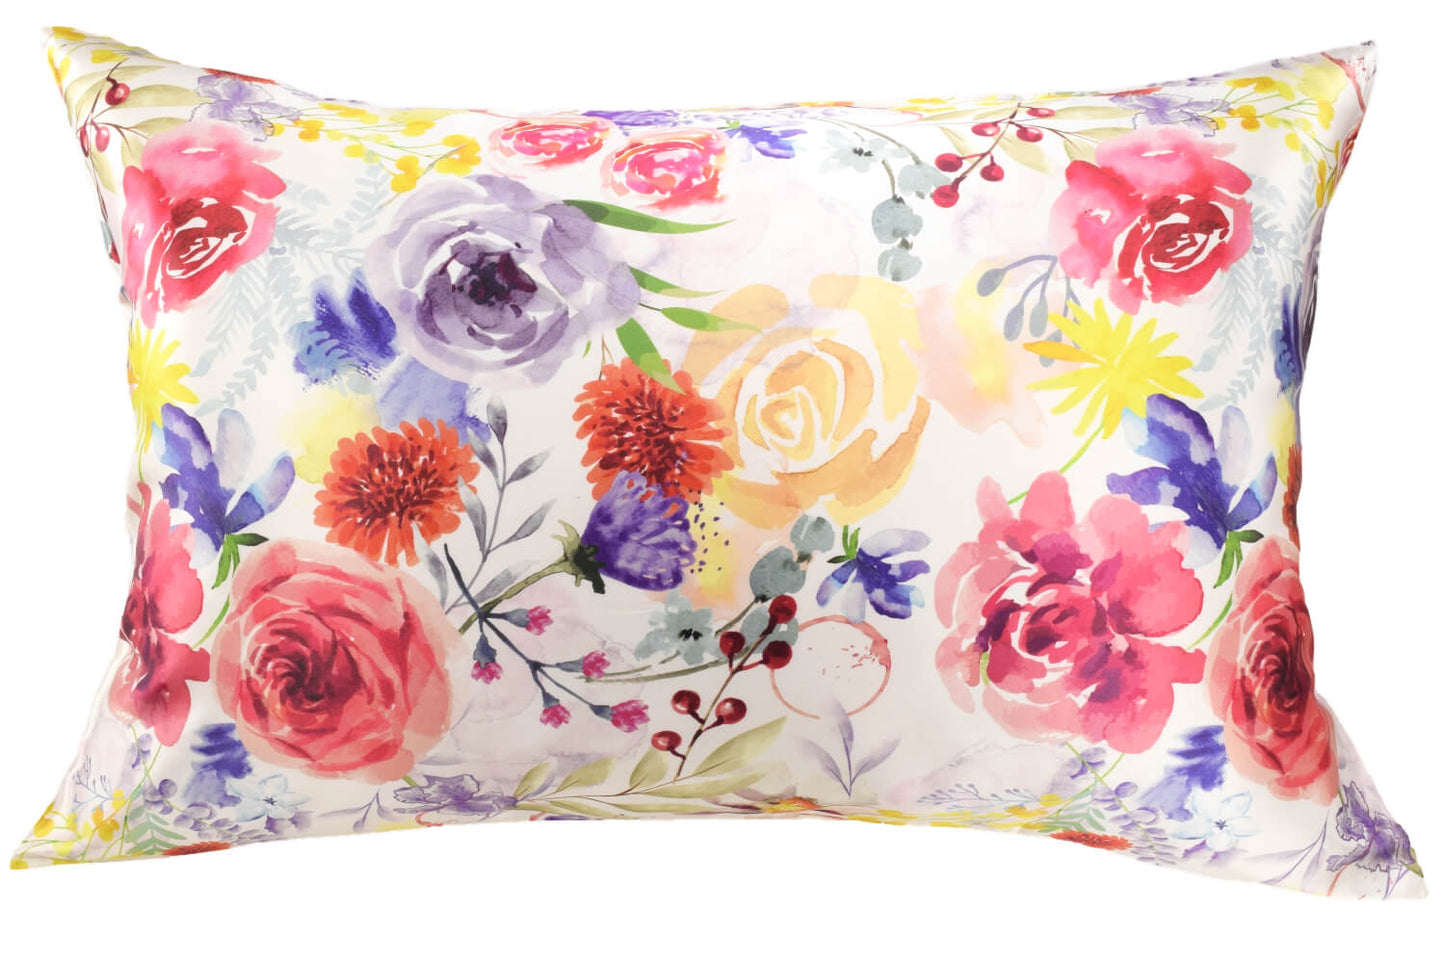 Silk Pillowcase - 25 Momme Pure Mulberry Silk - Prints